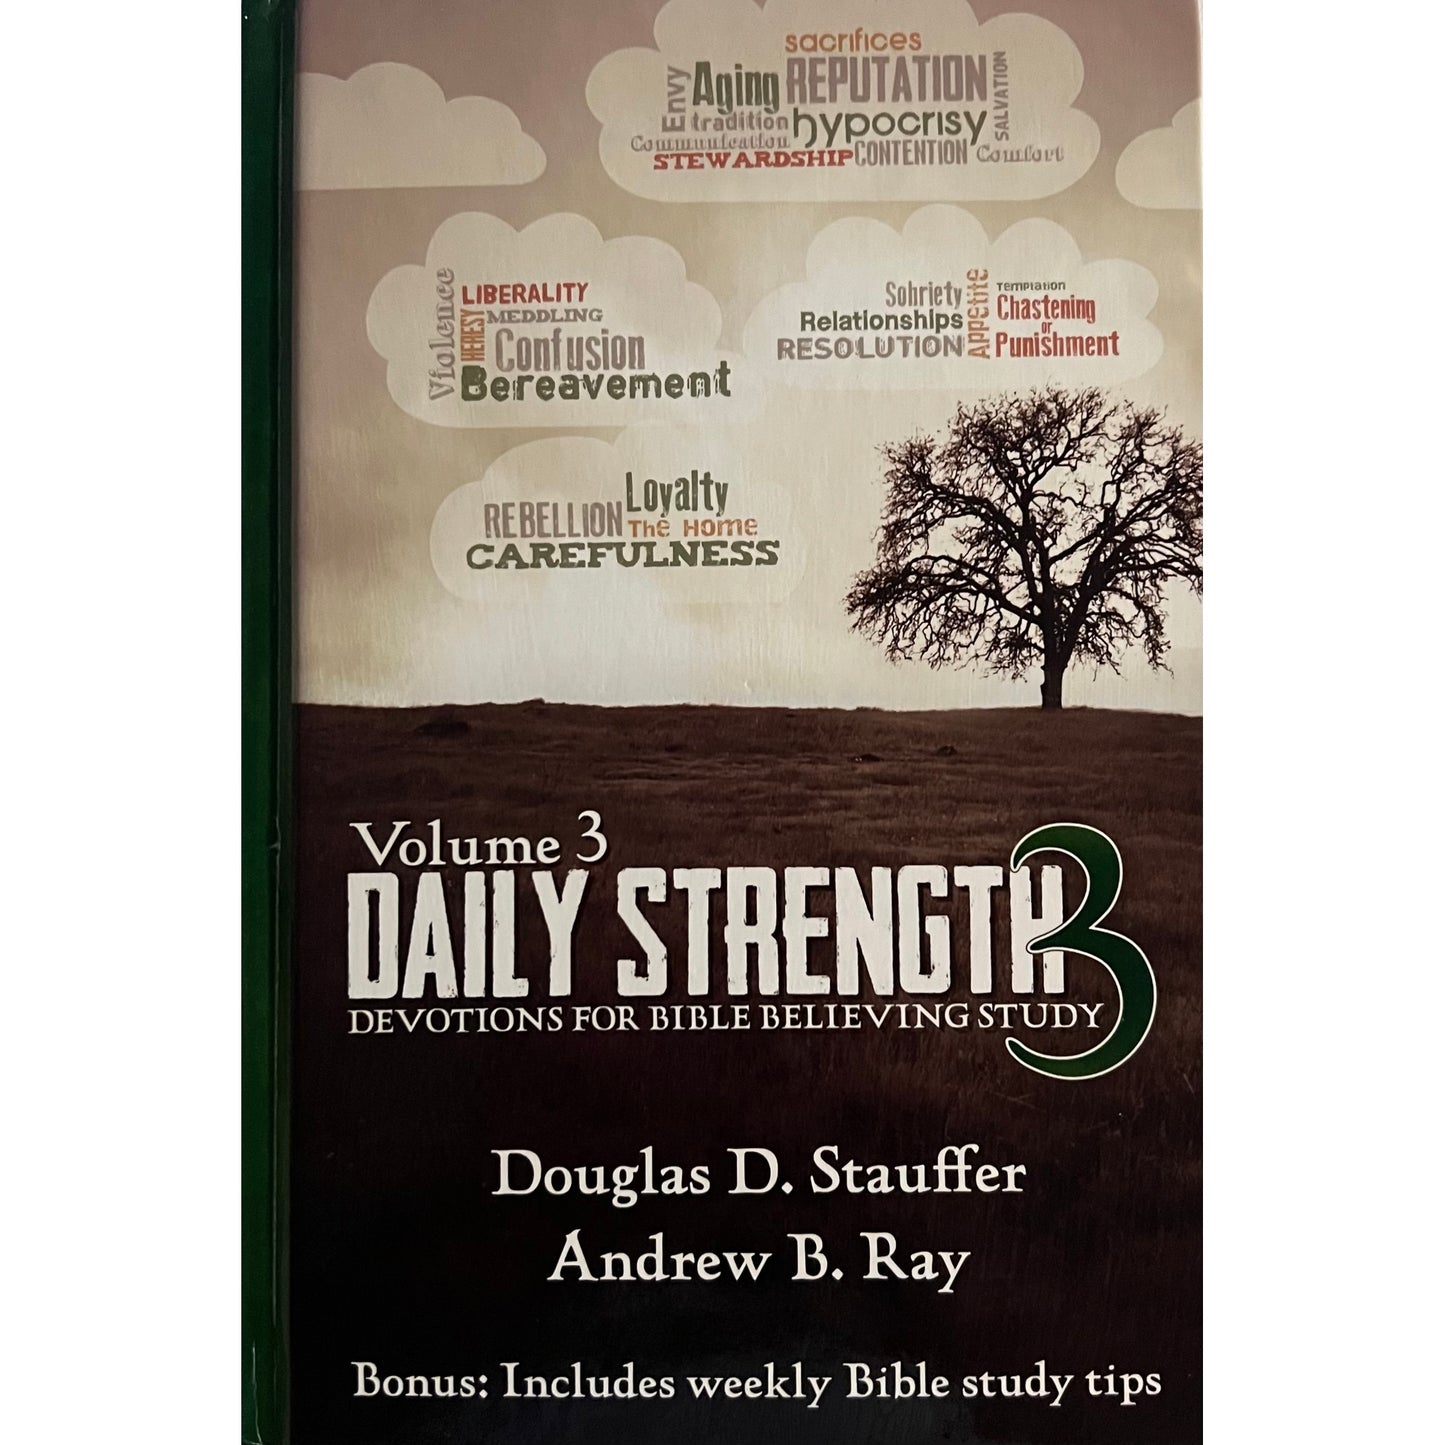 Daily Strength III: Devotions for Bible-Believing Study